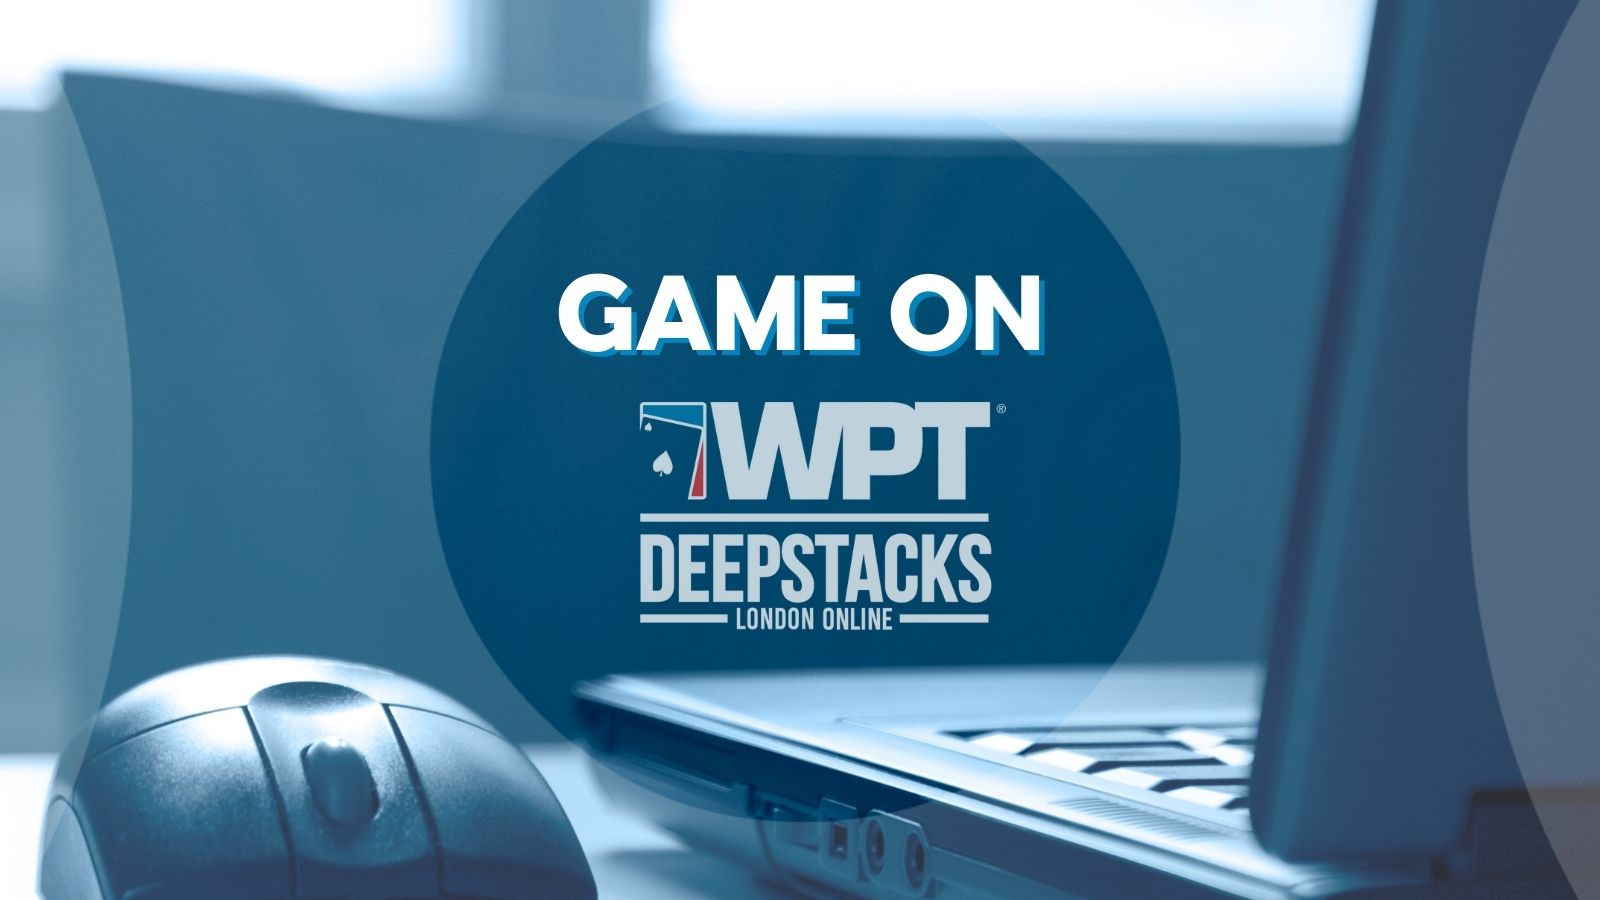 On Sunday, the first-ever WPTDeepStacks London Online series kicked off on 888poker.